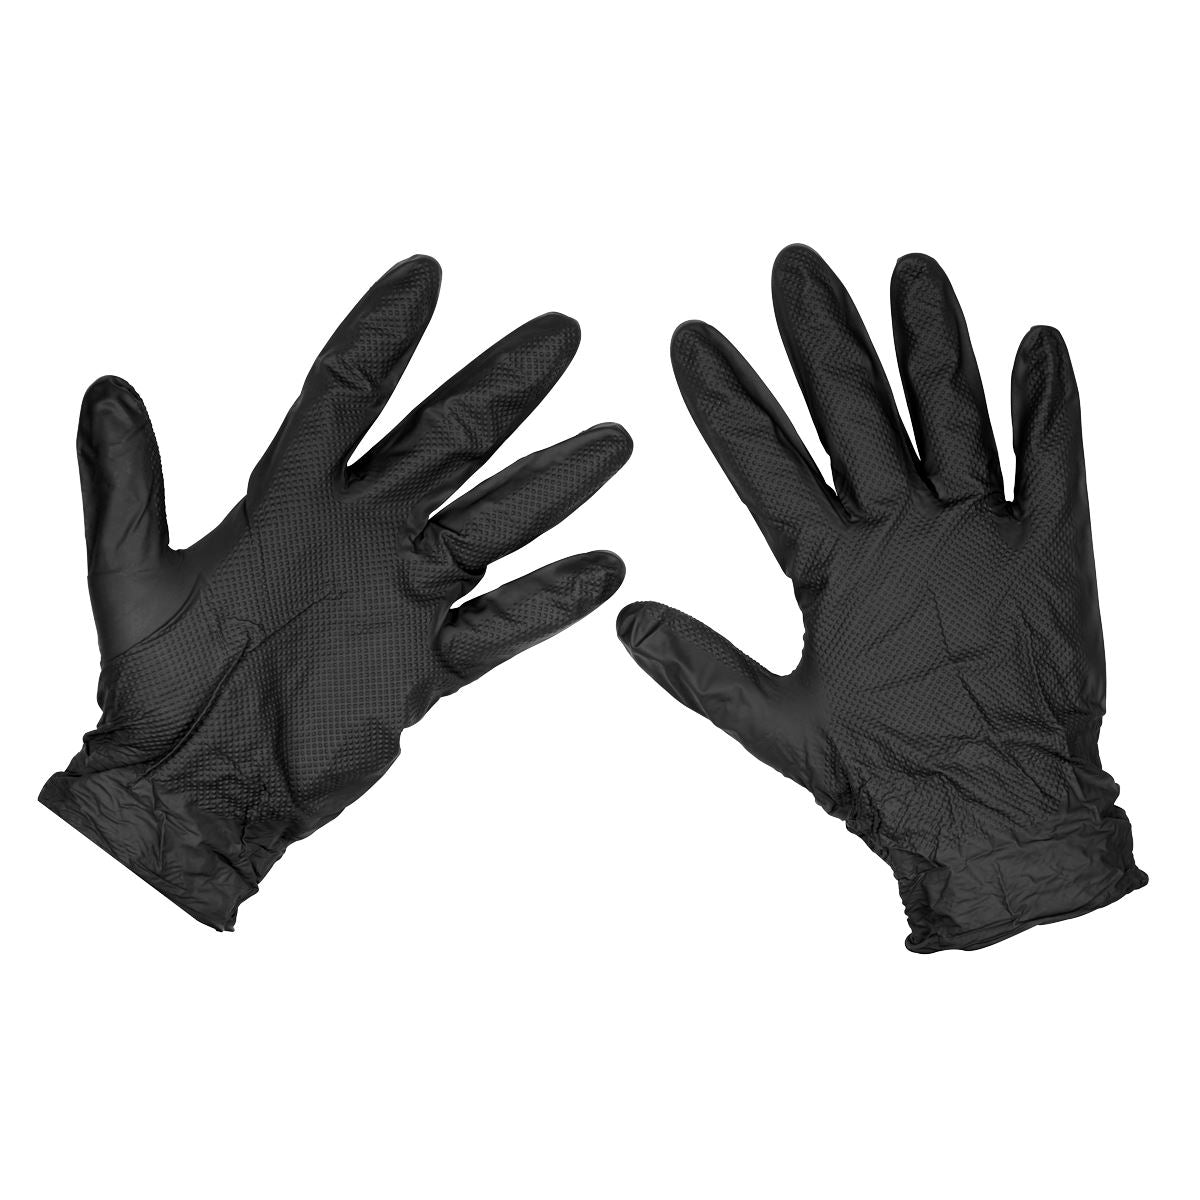 Sealey Black Diamond Grip Extra-Thick Nitrile Powder-Free Gloves Large - Pack of 50